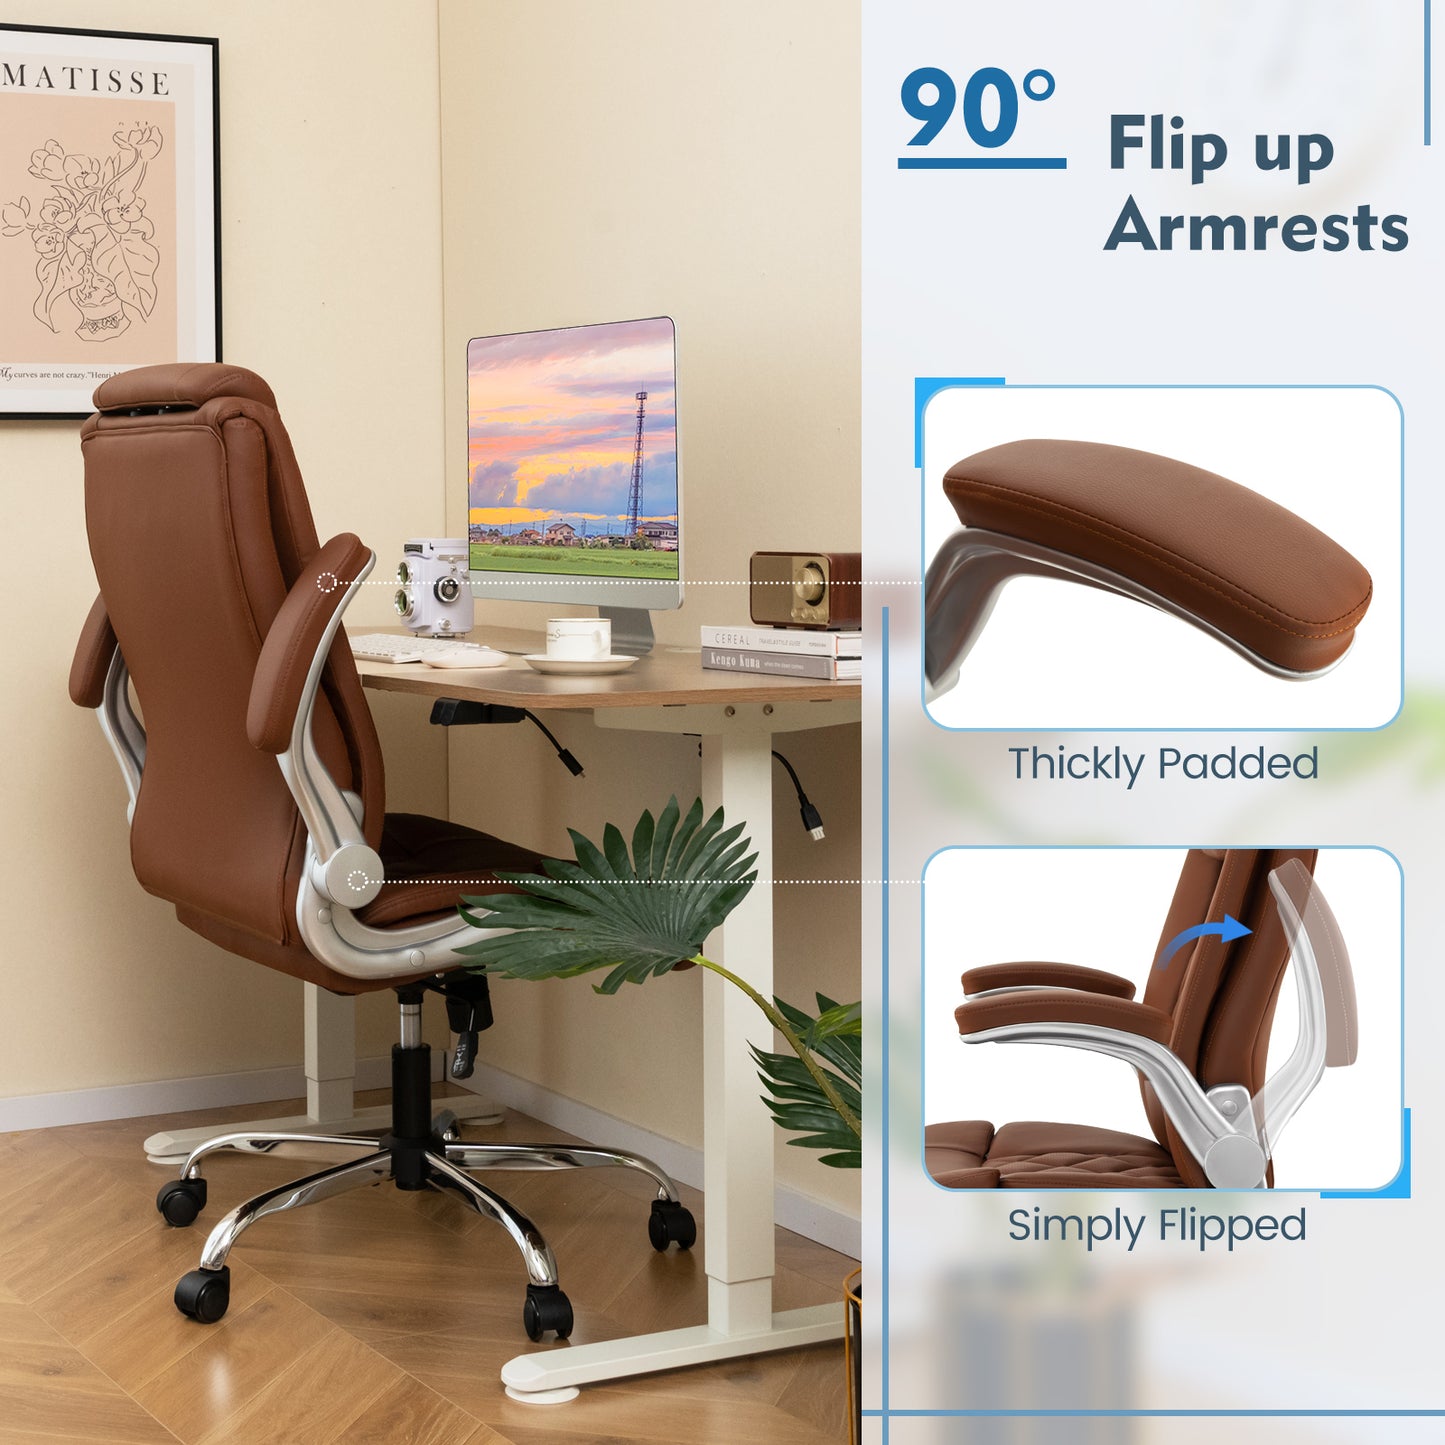 Modern Height Adjustable PU Leather Office Chair with Rocking Function-Brown